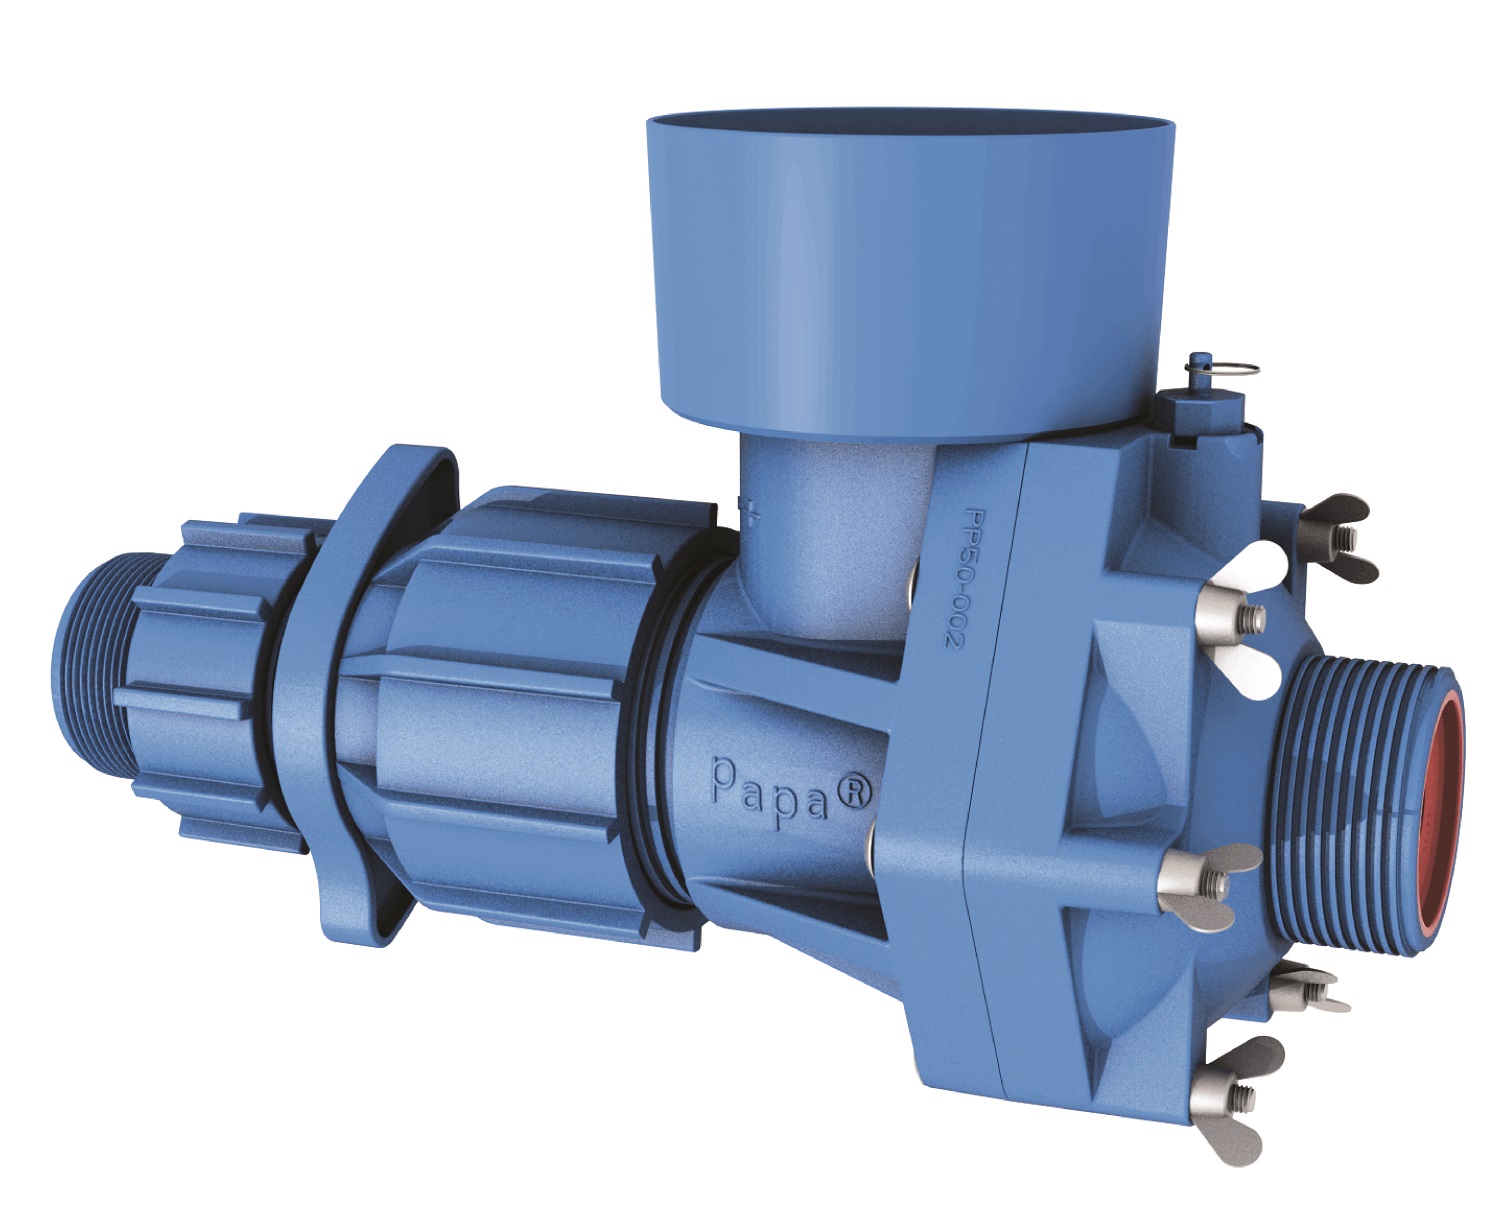 Papa Pumps require no electricity, diesel or any other fuel and work with the power of flowing water.